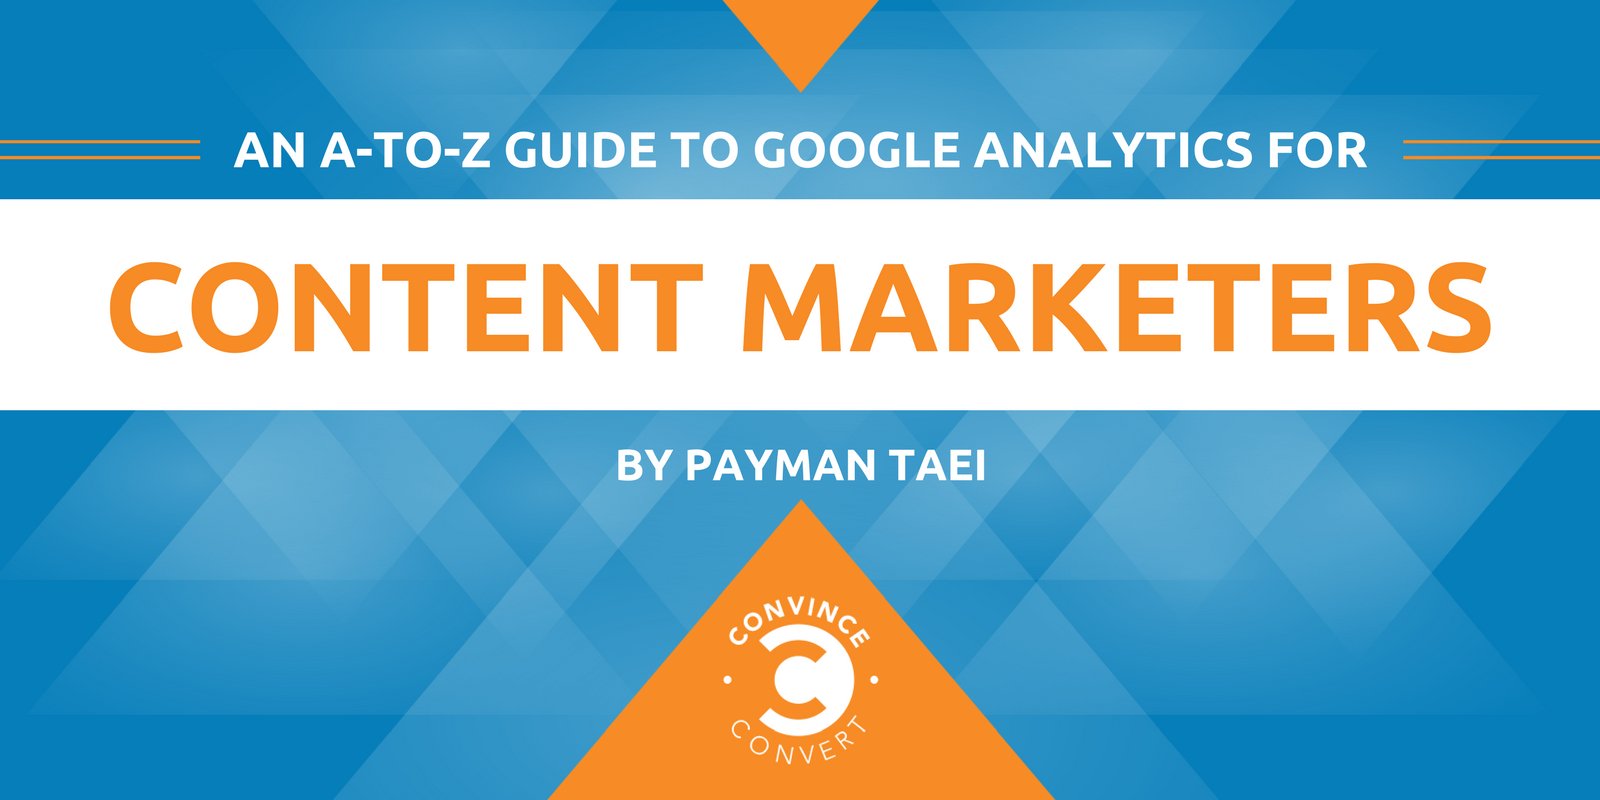 An A-to-Z Guide to Google Analytics for Content Marketers